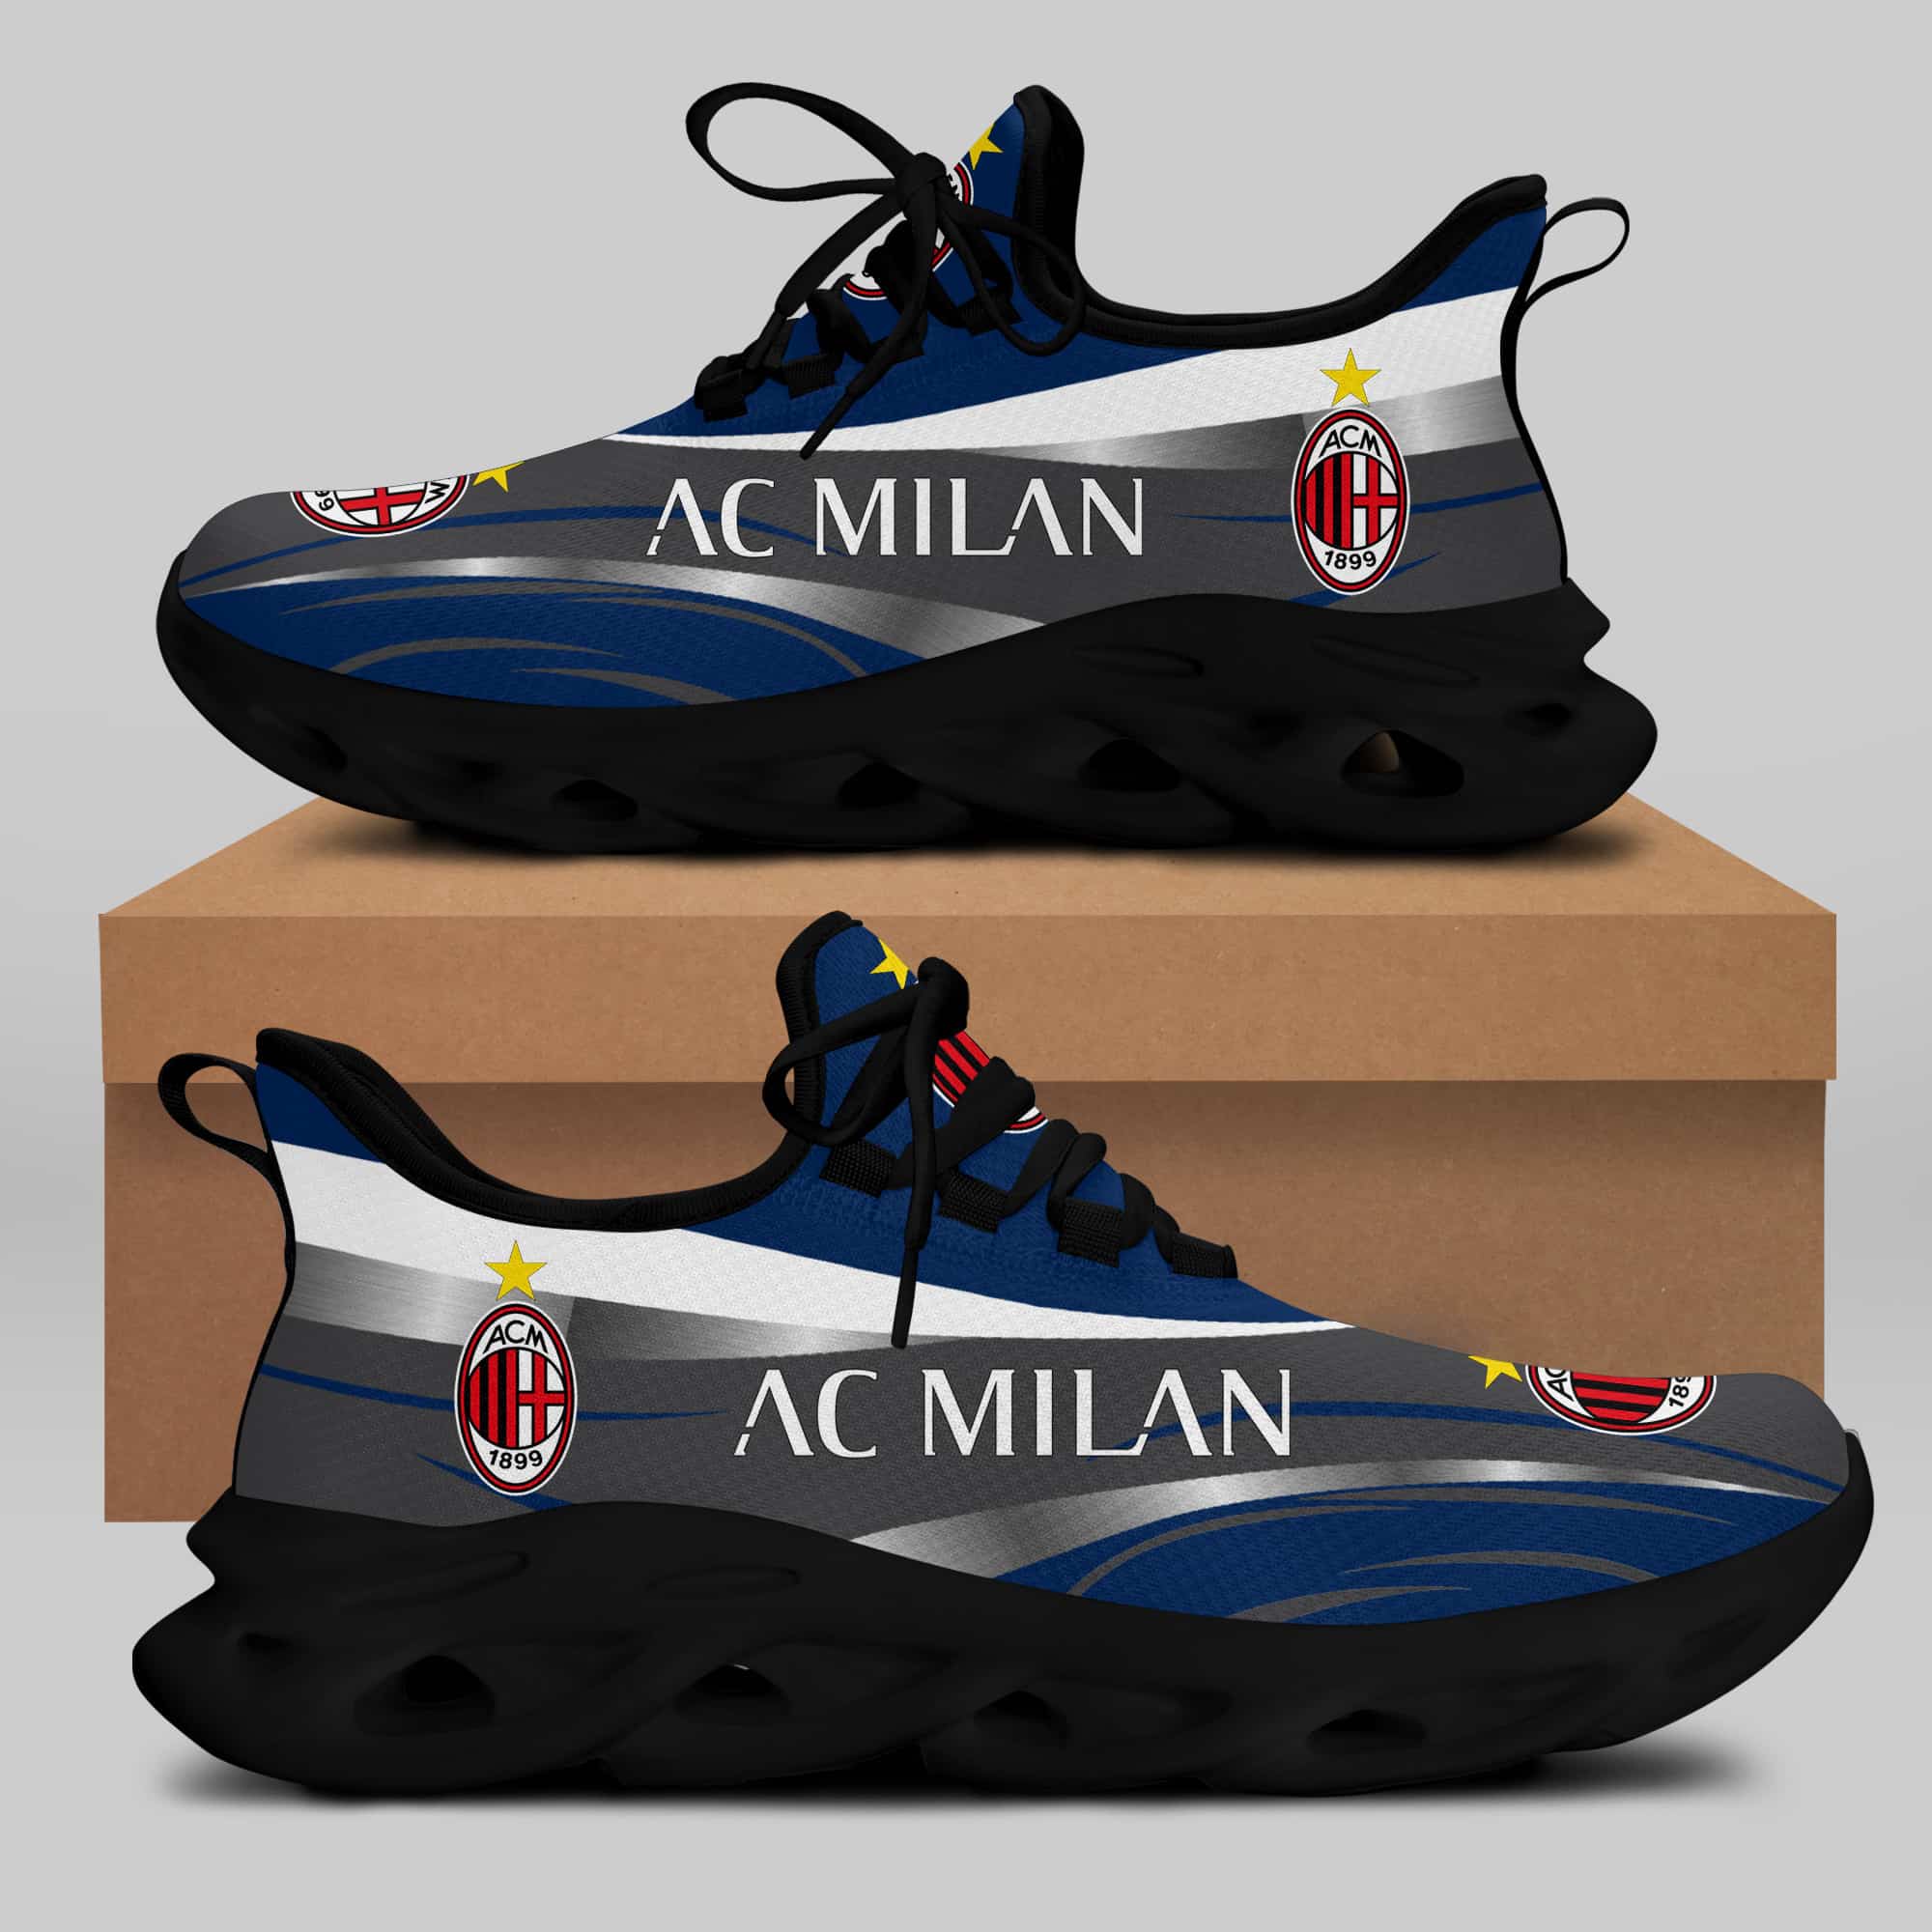 Ac Milan Running Shoes Max Soul Shoes Sneakers Ver 32 2